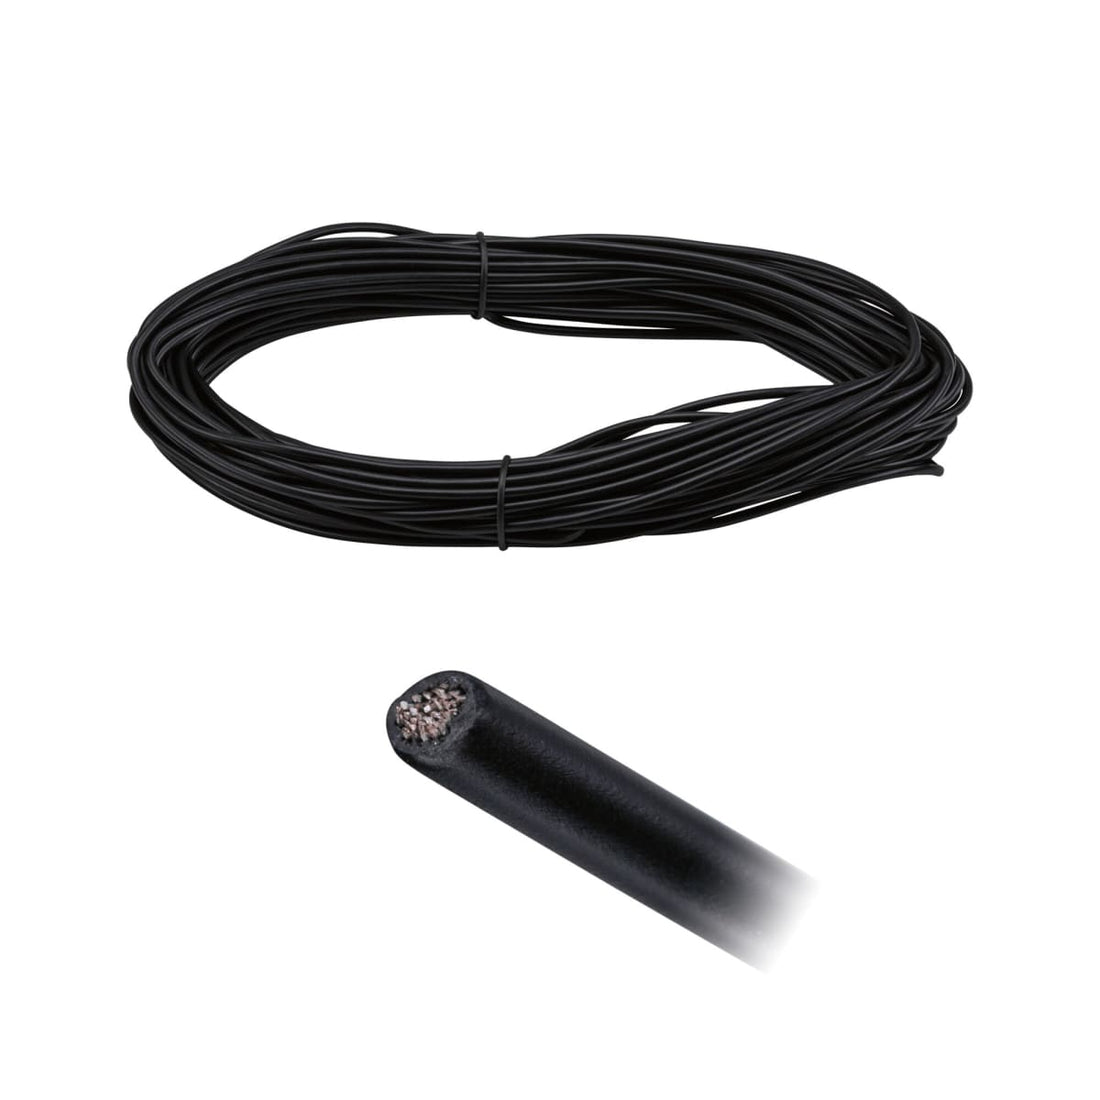 INSULATED CORDUO CABLE 20 M 2.5MM BLACK